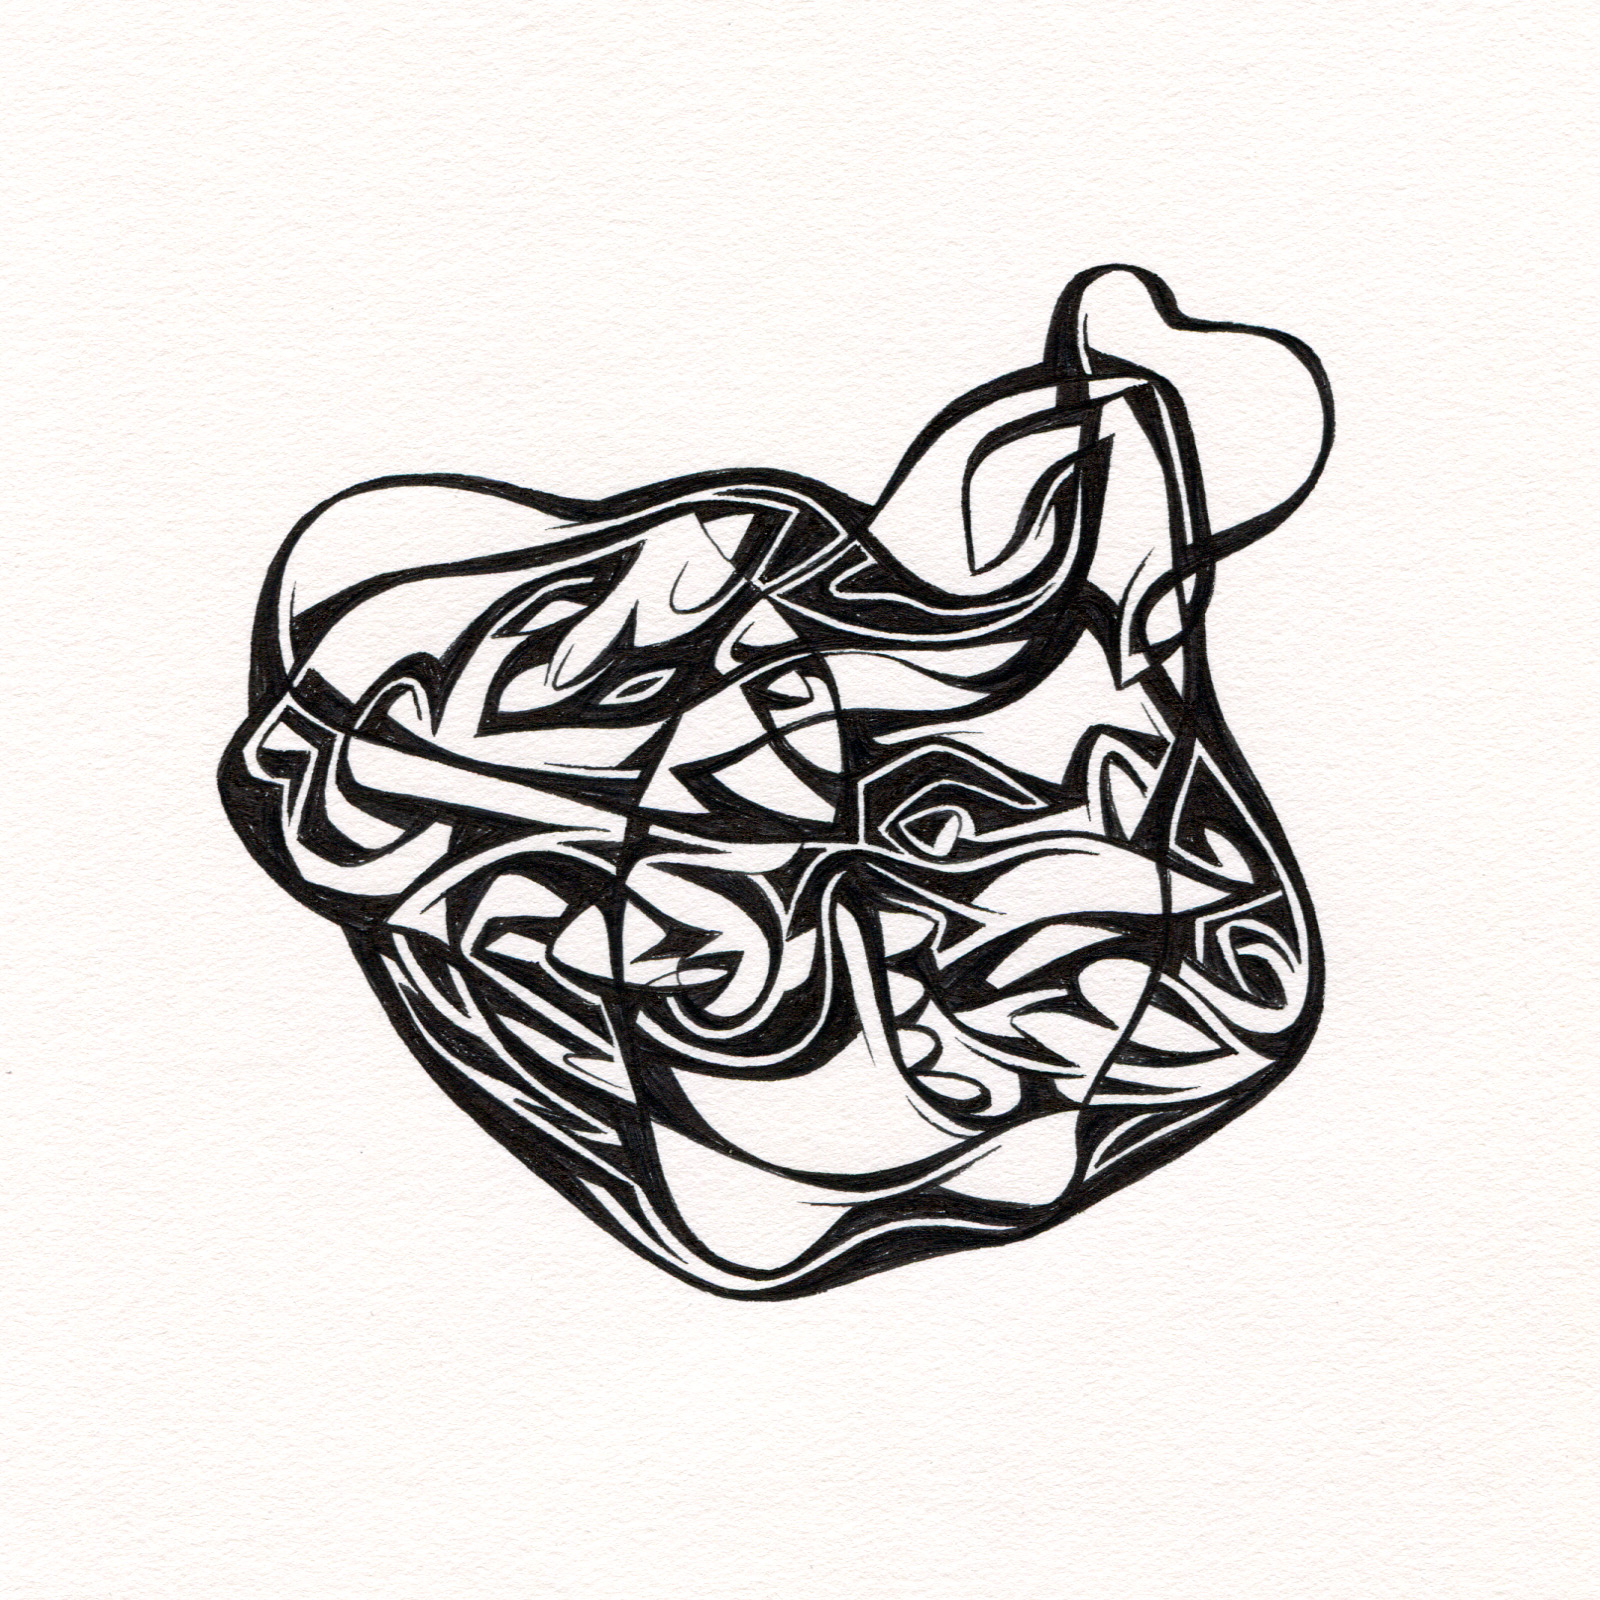   Untitled Ink Drawing #89 , 2015. Ink on paper. Approximately 5" x 5". 